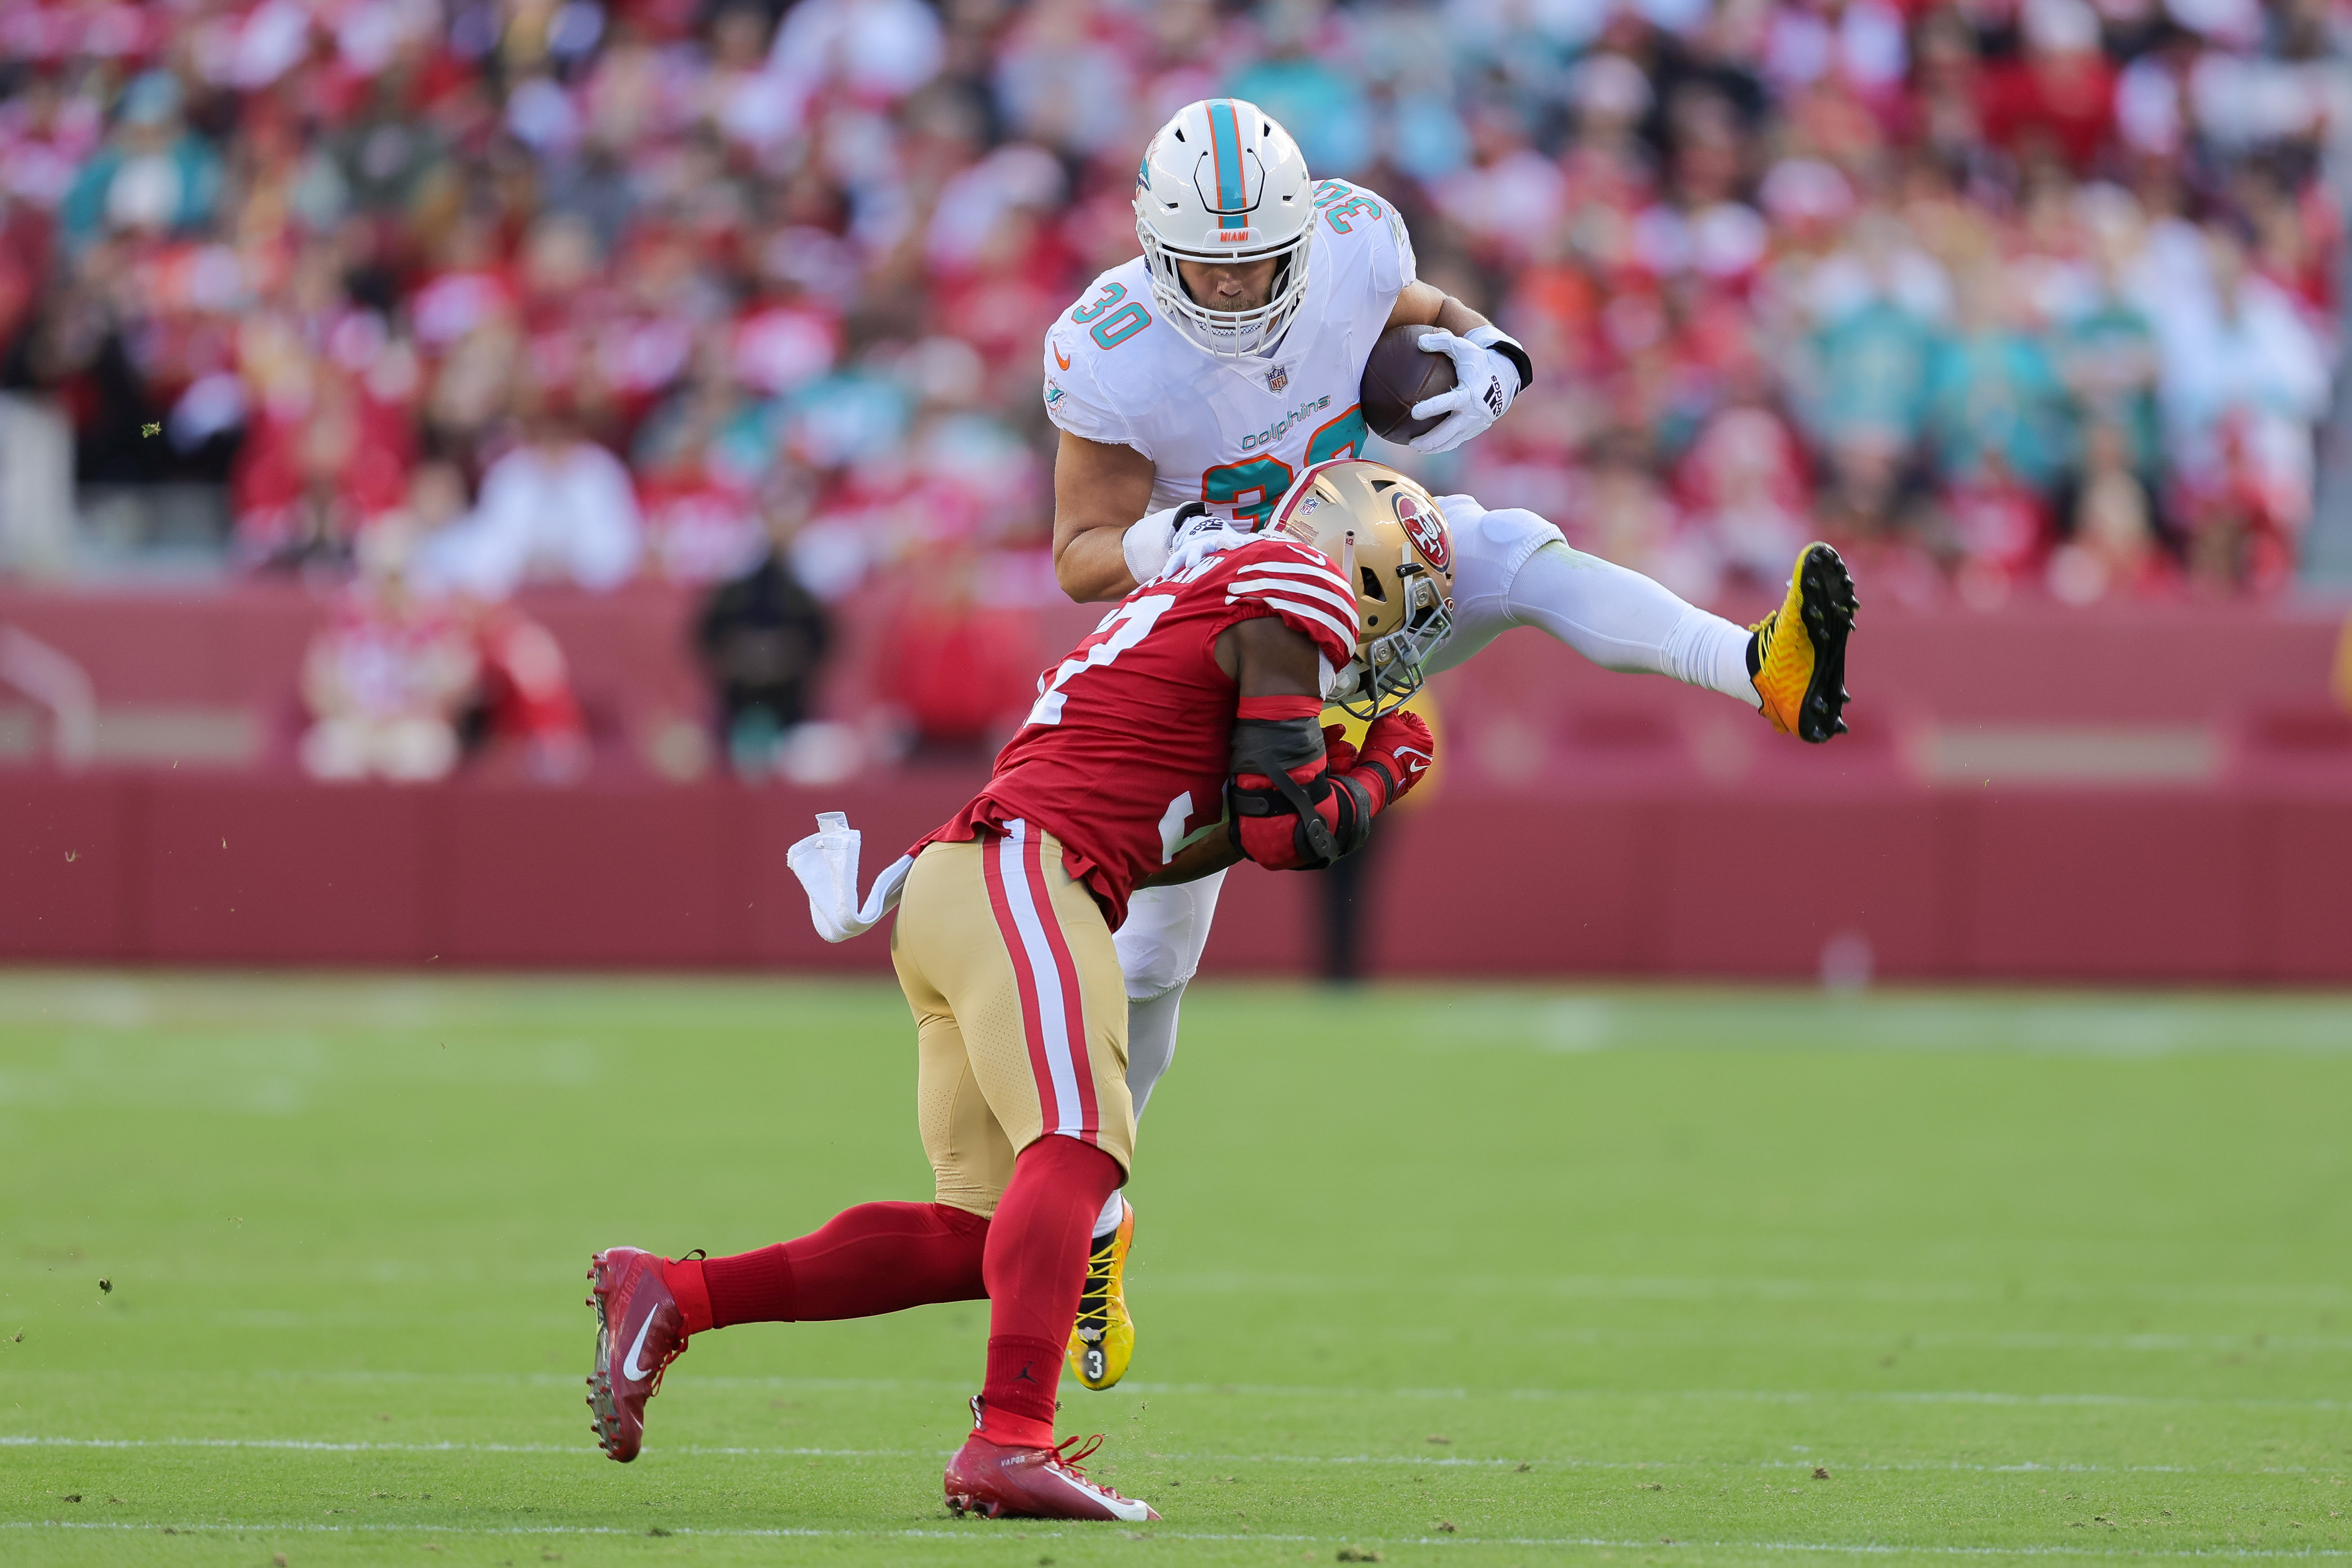 NFL: Miami Dolphins at San Francisco 49ers